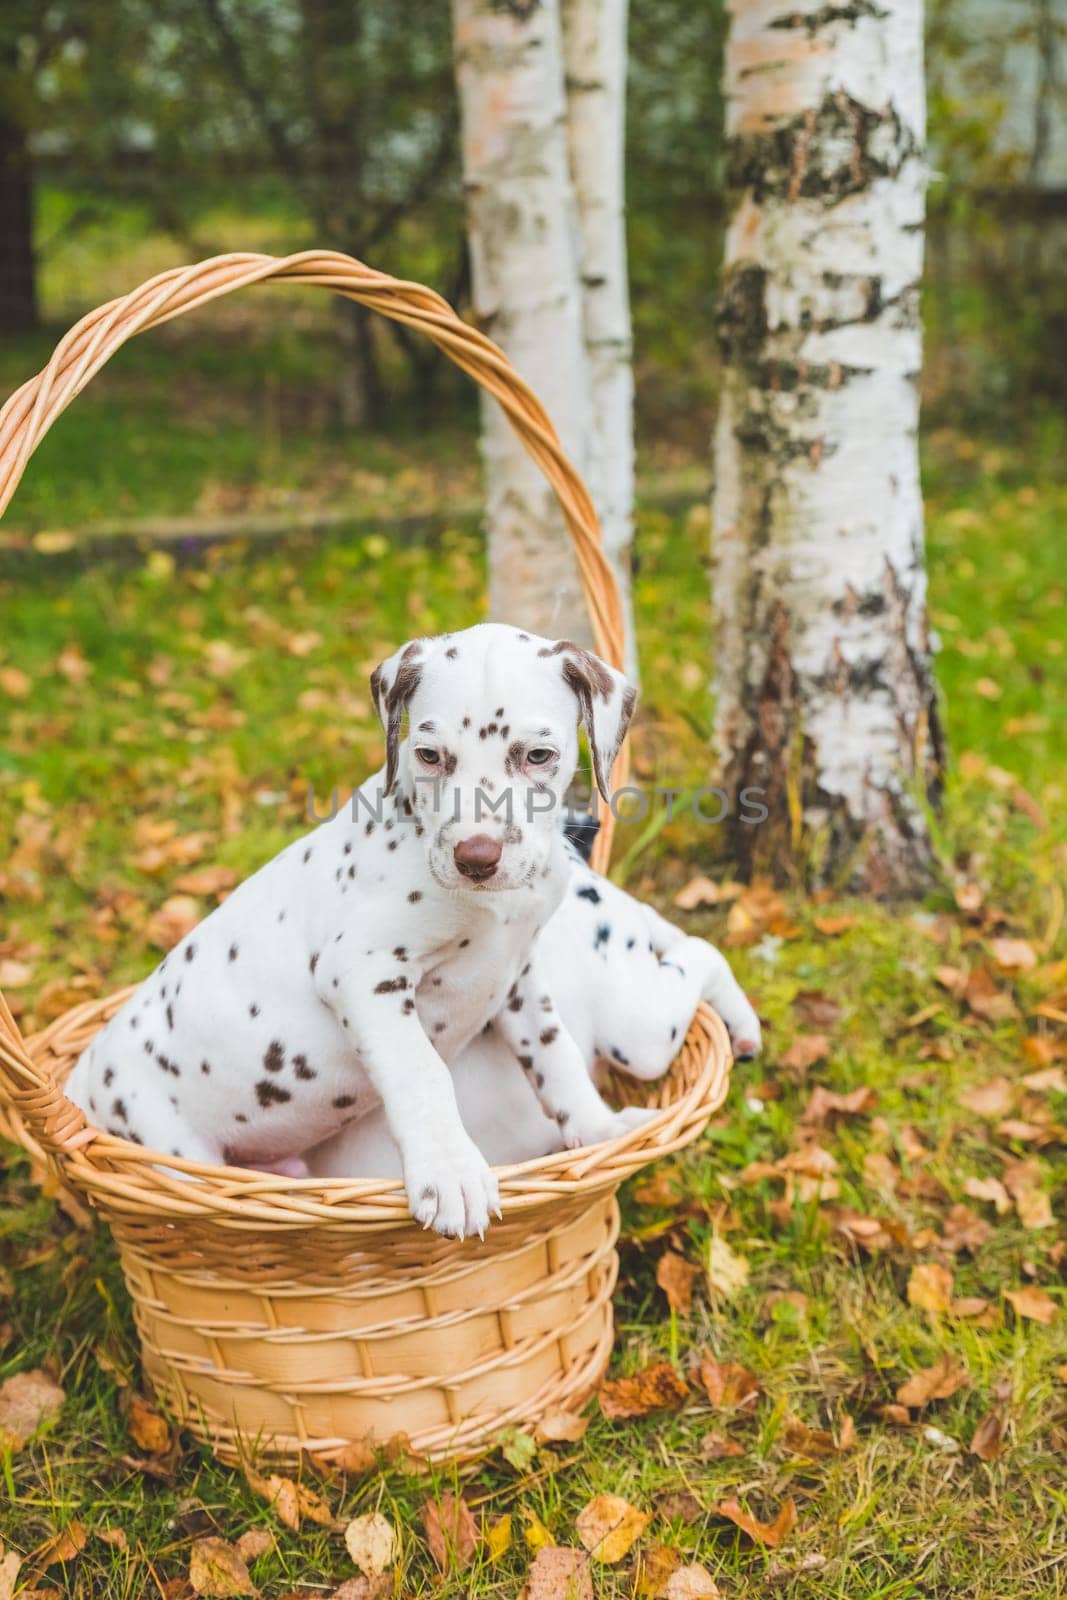 Two dalmatian puppies playing, in wicker basket.